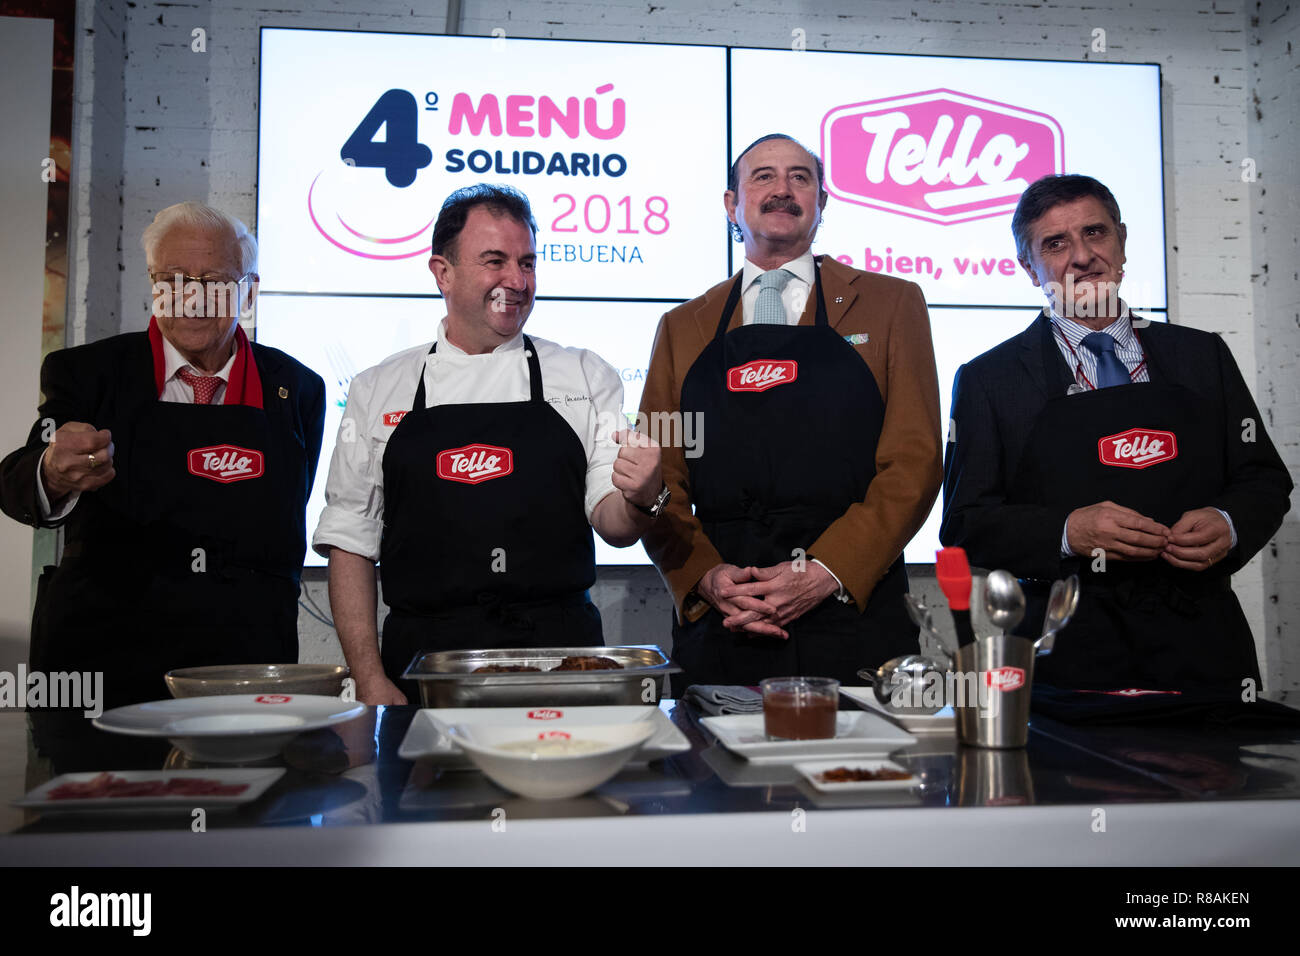 December 14, 2018 - Madrid, Spain - FATHER ANGEL, president of the NGO Mensajeros de la Paz(left), MARTIN BERASATEGUI, chef with 10 Michelin stars, DR MANUEL DE LA TORRE, President of the Foundation of Dr Manuel de la Torre and ALFONSO ALCAZAR, General Director of the Tello AlimentaciÃ³n Group. Presentation of the Menus Solidarios 2018 that will be offered to 250 people without resources at the Christmas Eve Dinner of Messengers of Peace and are prepared by MartÃn Berasategui on Dec 14, 2018 in Madrid, Spain (Credit Image: © Jesus Hellin/ZUMA Wire) Stock Photo